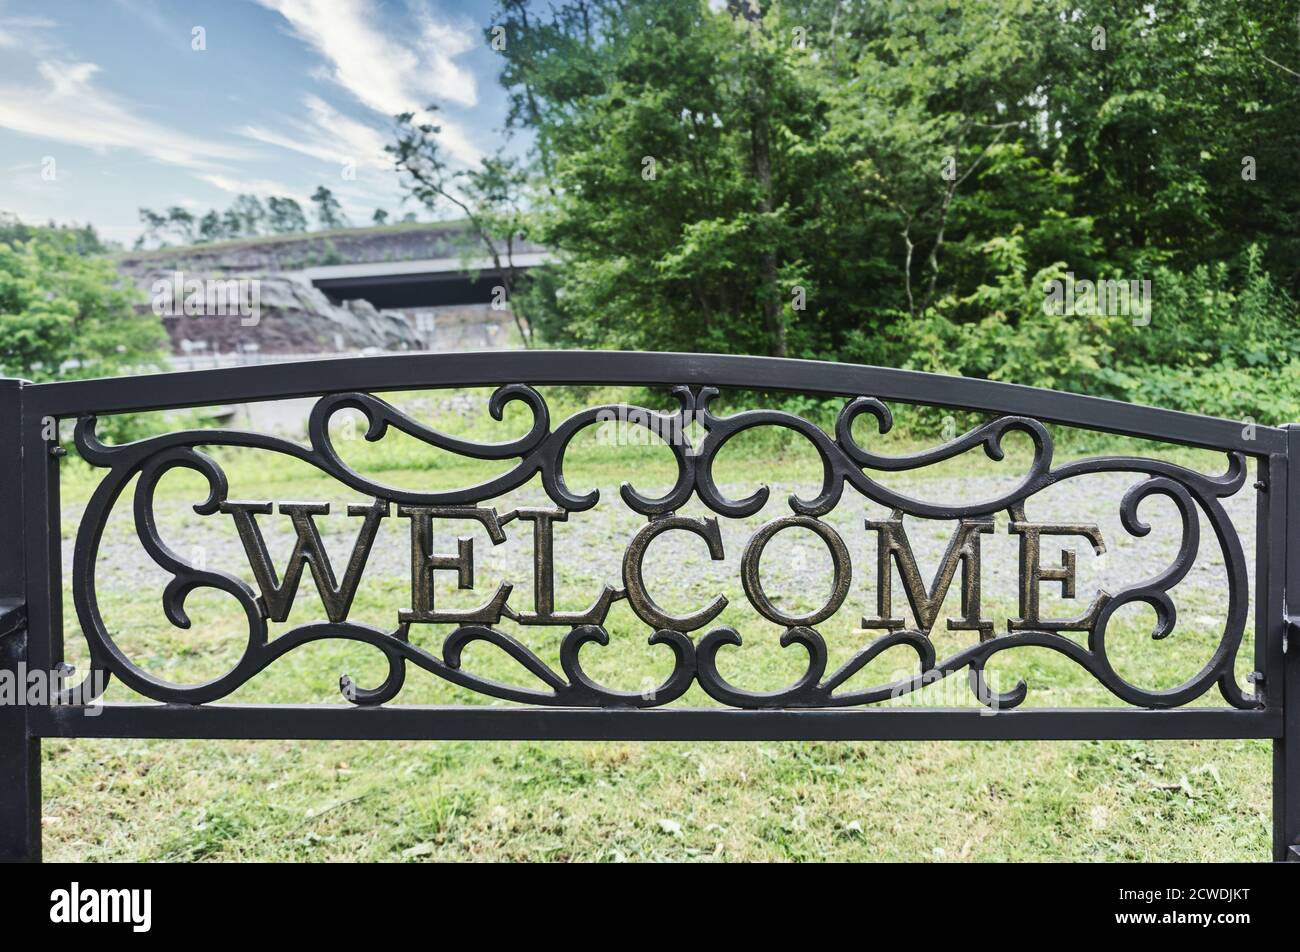 Welcome metal sign on a seat. Trees and bridge in the background Stock Photo